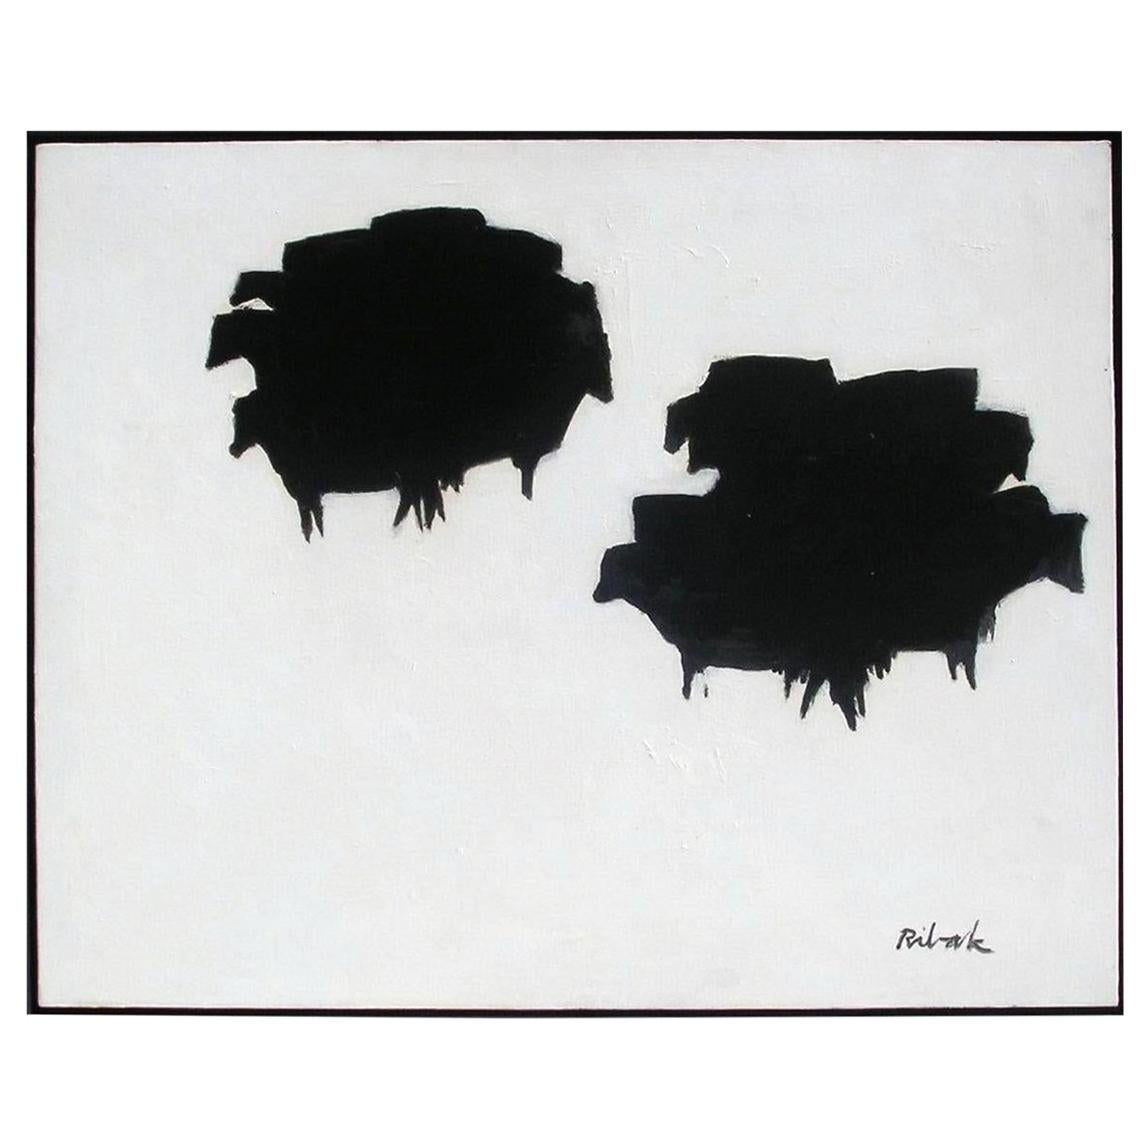 Louis Ribak New Mexico Modernist Abstract Painting, Black Angus